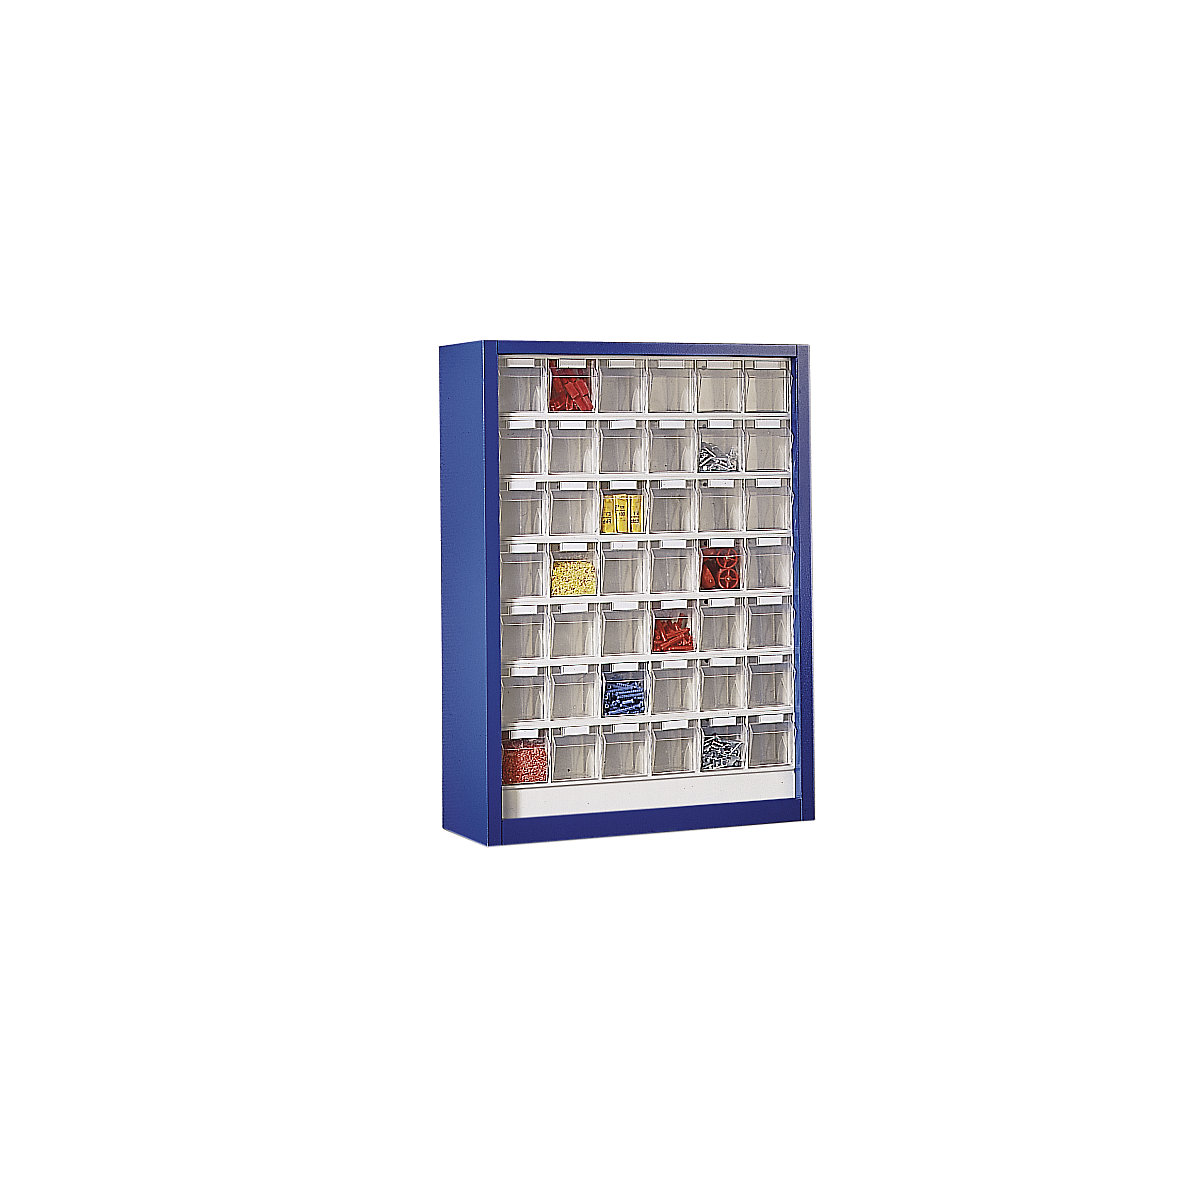 Wall mounted cupboard for visual storage containers, HxWxD 910 x 665 x 250 mm, with 42 bins, gentian blue housing-4